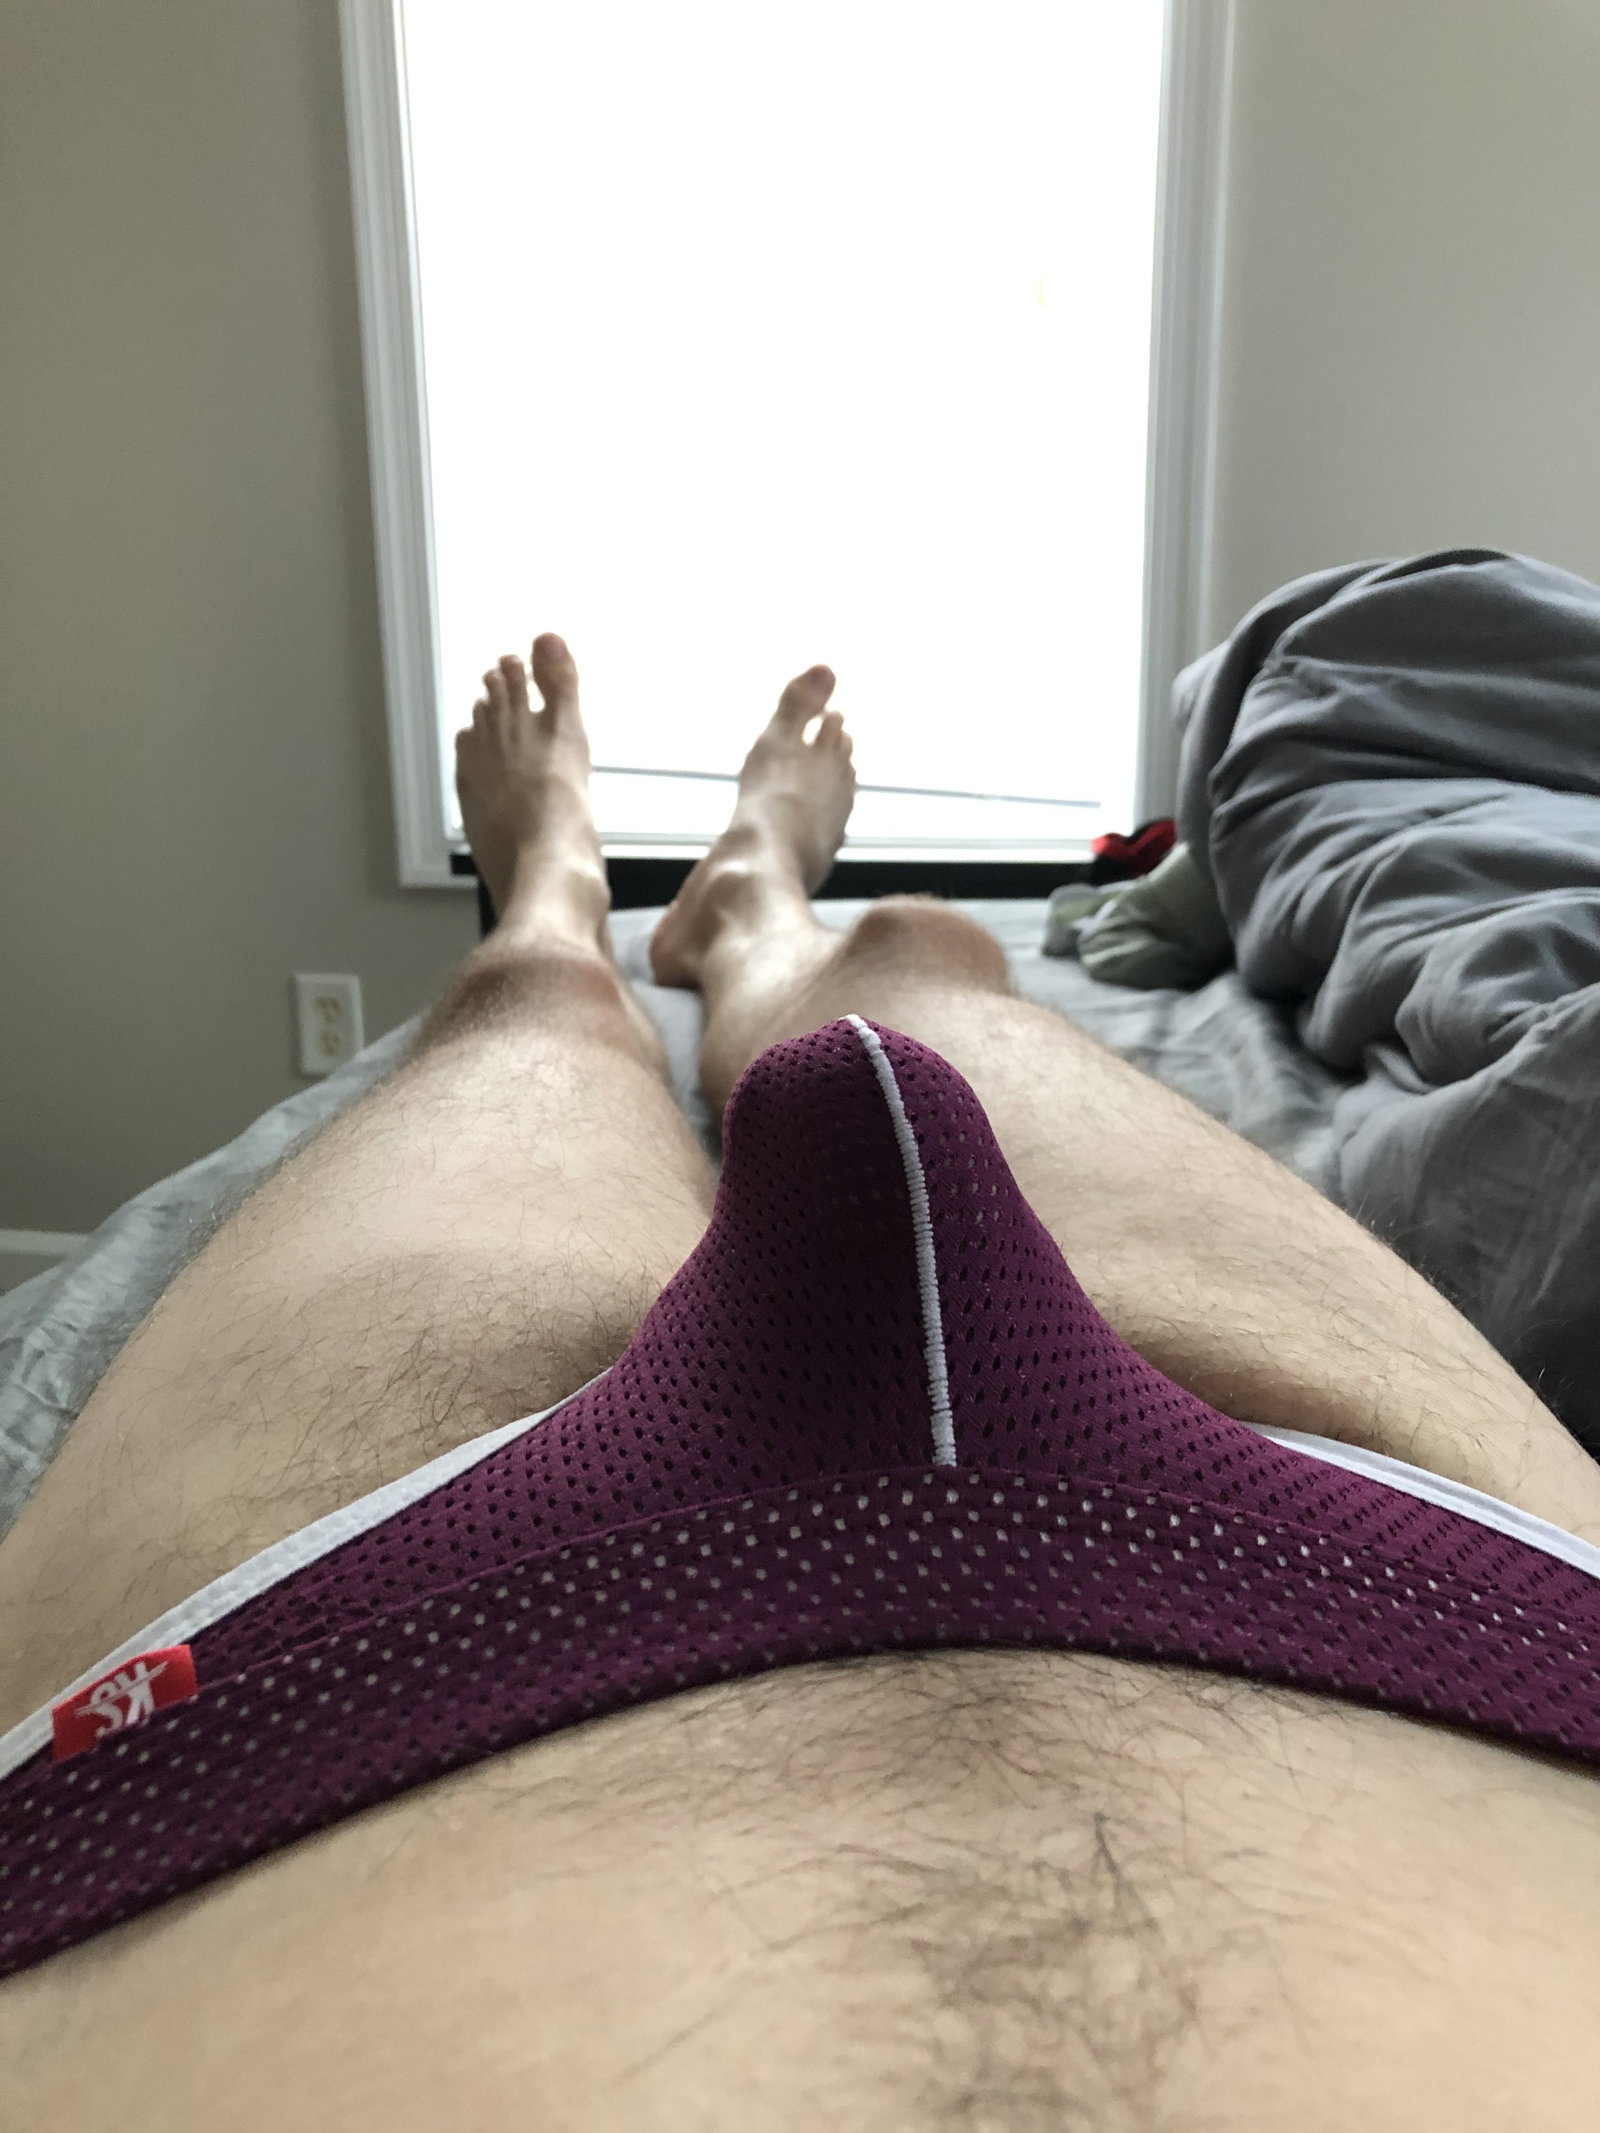 Watch the Photo by CuddleFkkr with the username @CuddleFkkr, posted on July 12, 2020. The post is about the topic Gay Undies. and the text says 'Trying on my mesh Arjen Kroos jocks'